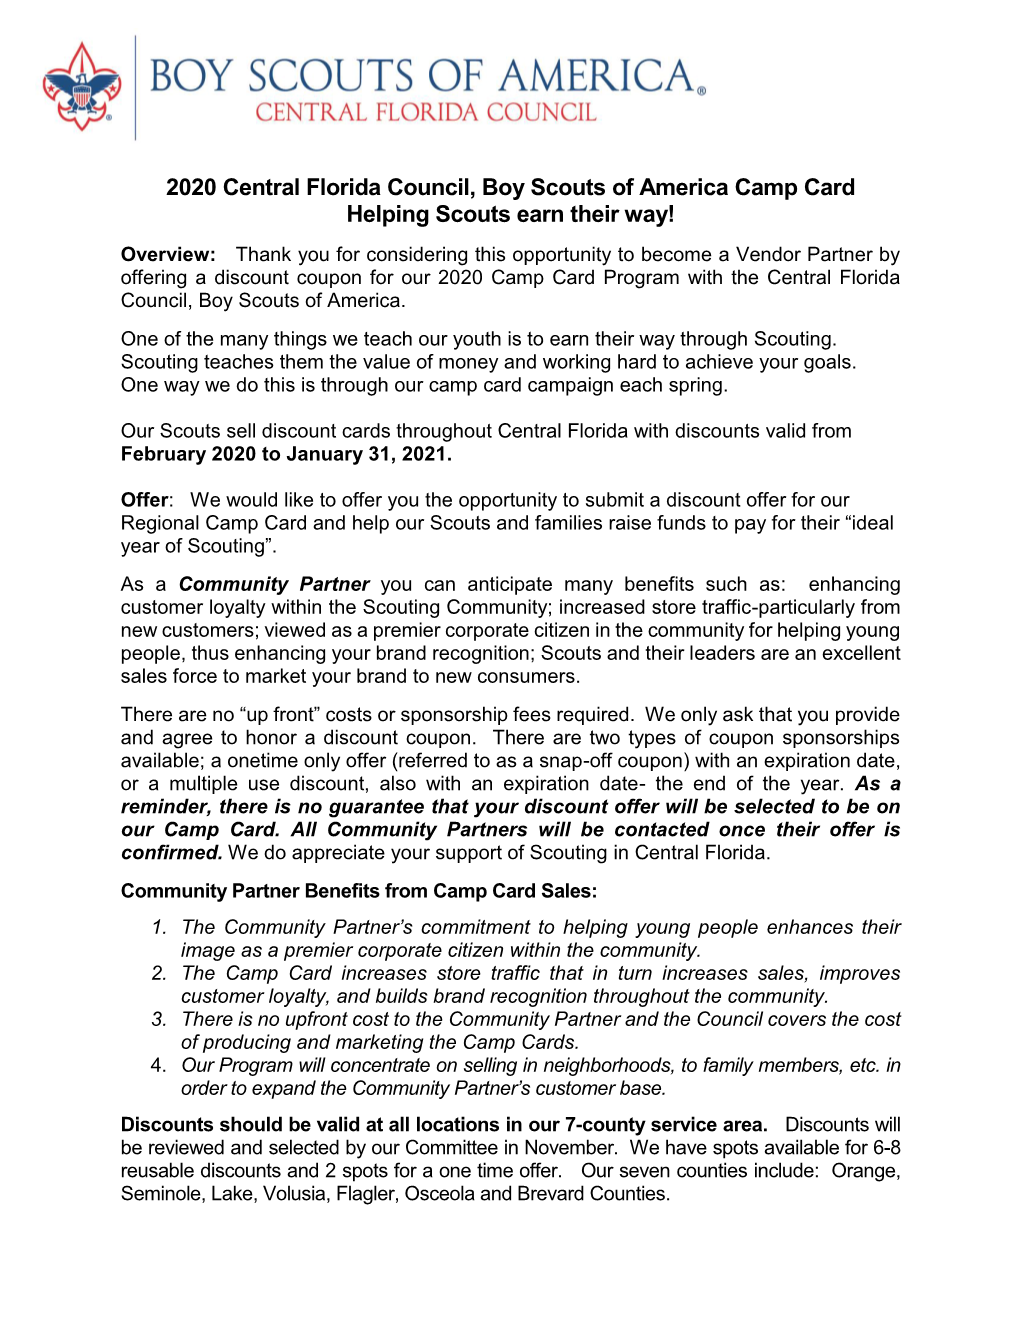 2020 Central Florida Council, Boy Scouts of America Camp Card Helping Scouts Earn Their Way!